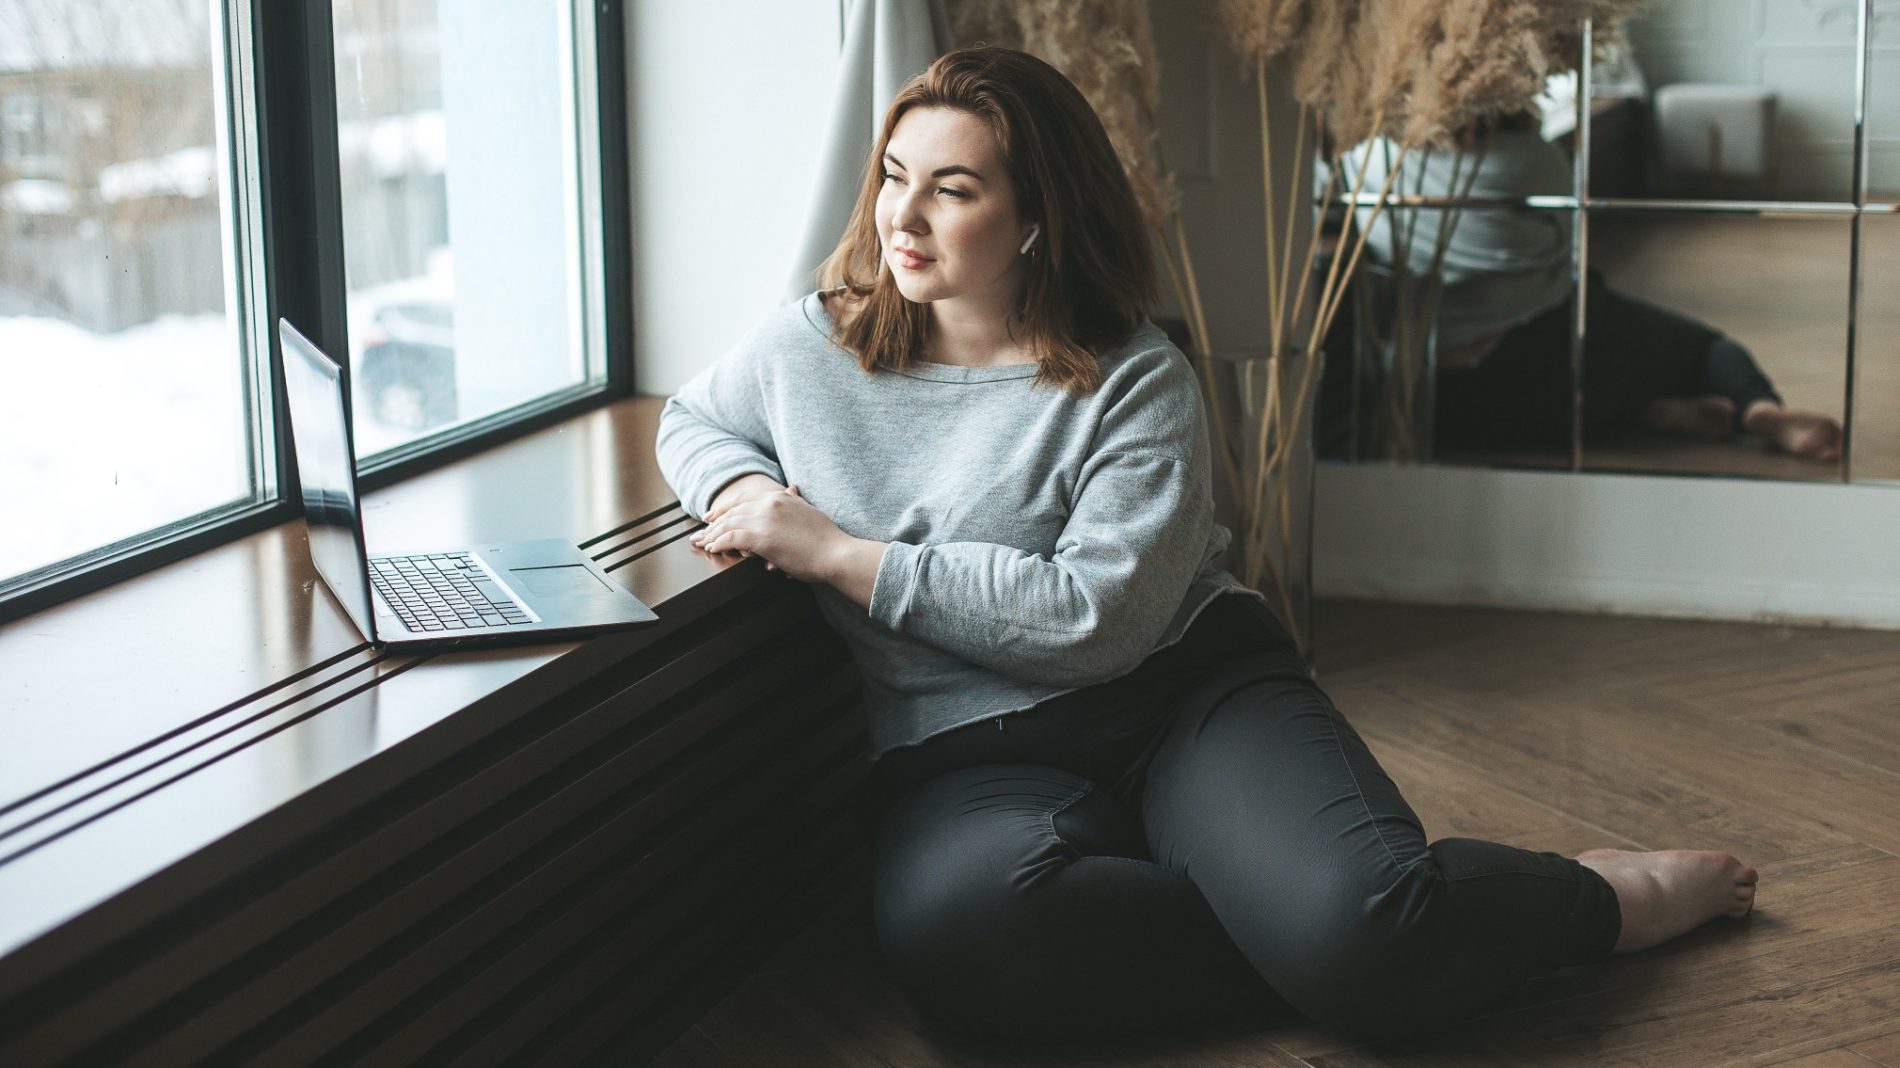 Photo of a person sitting on the floor with their laptop resting on the windowsill - Back to Work Enterprise Allowance